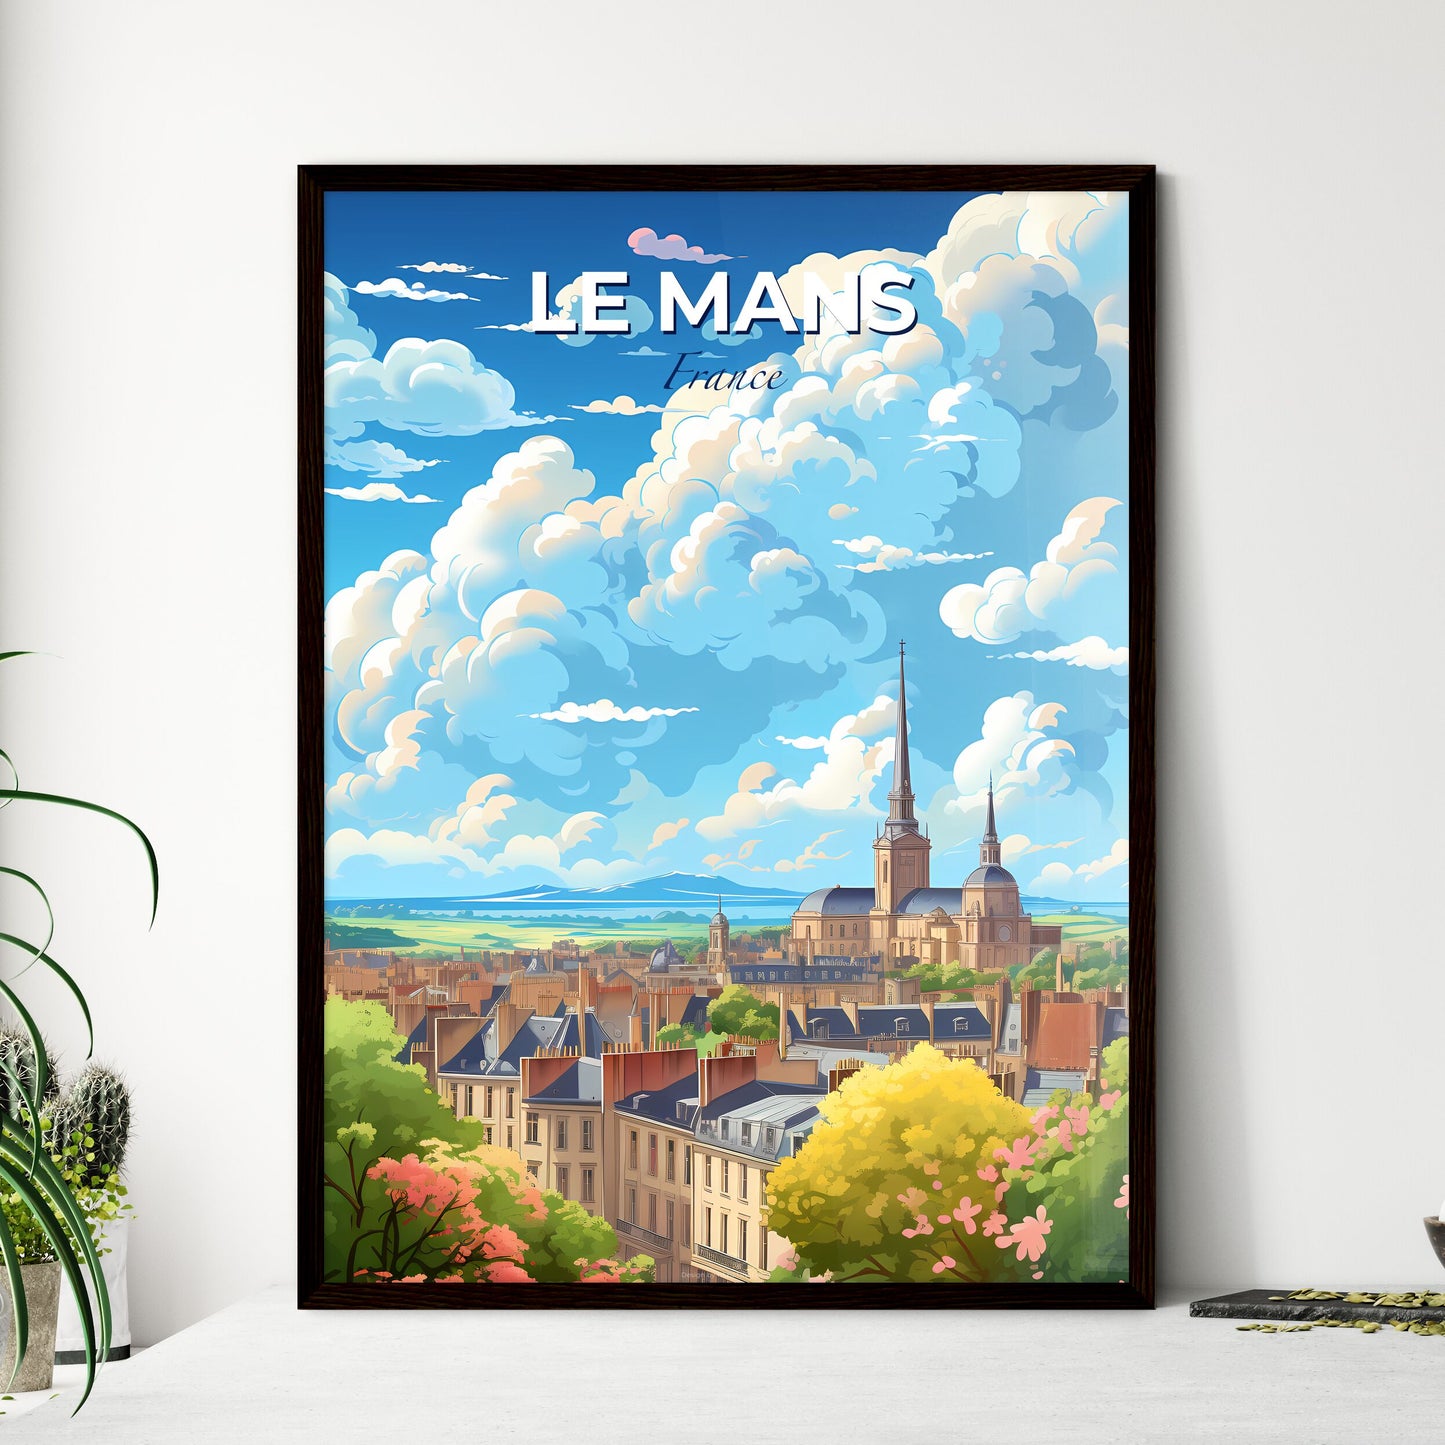 Le Mans France Skyline - A City Landscape With A Large Building And Trees - Customizable Travel Gift Default Title